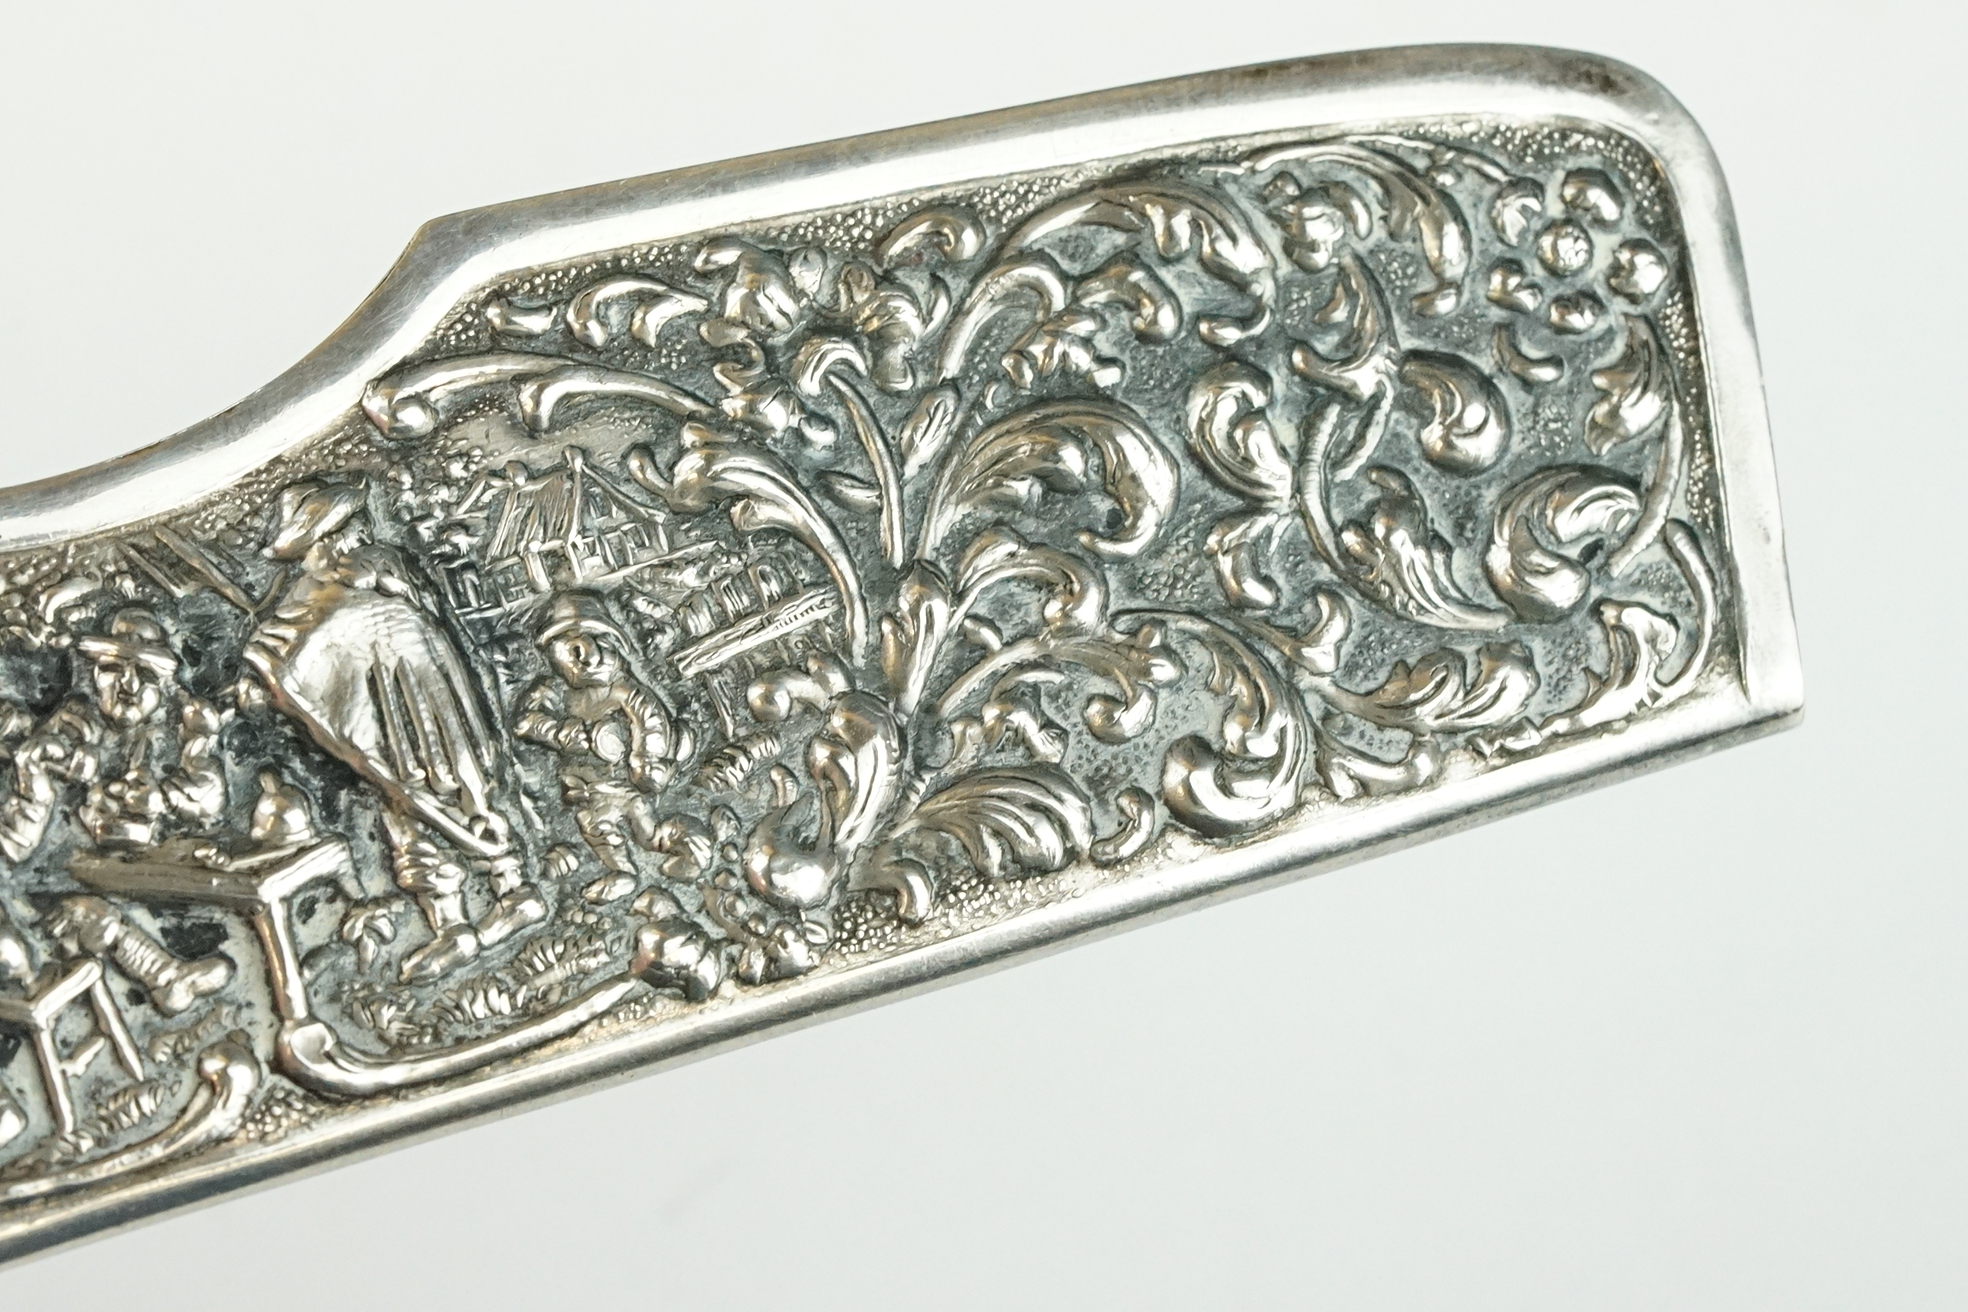 An antique sterling silver repoussé pattern hair comb and case. - Image 5 of 12